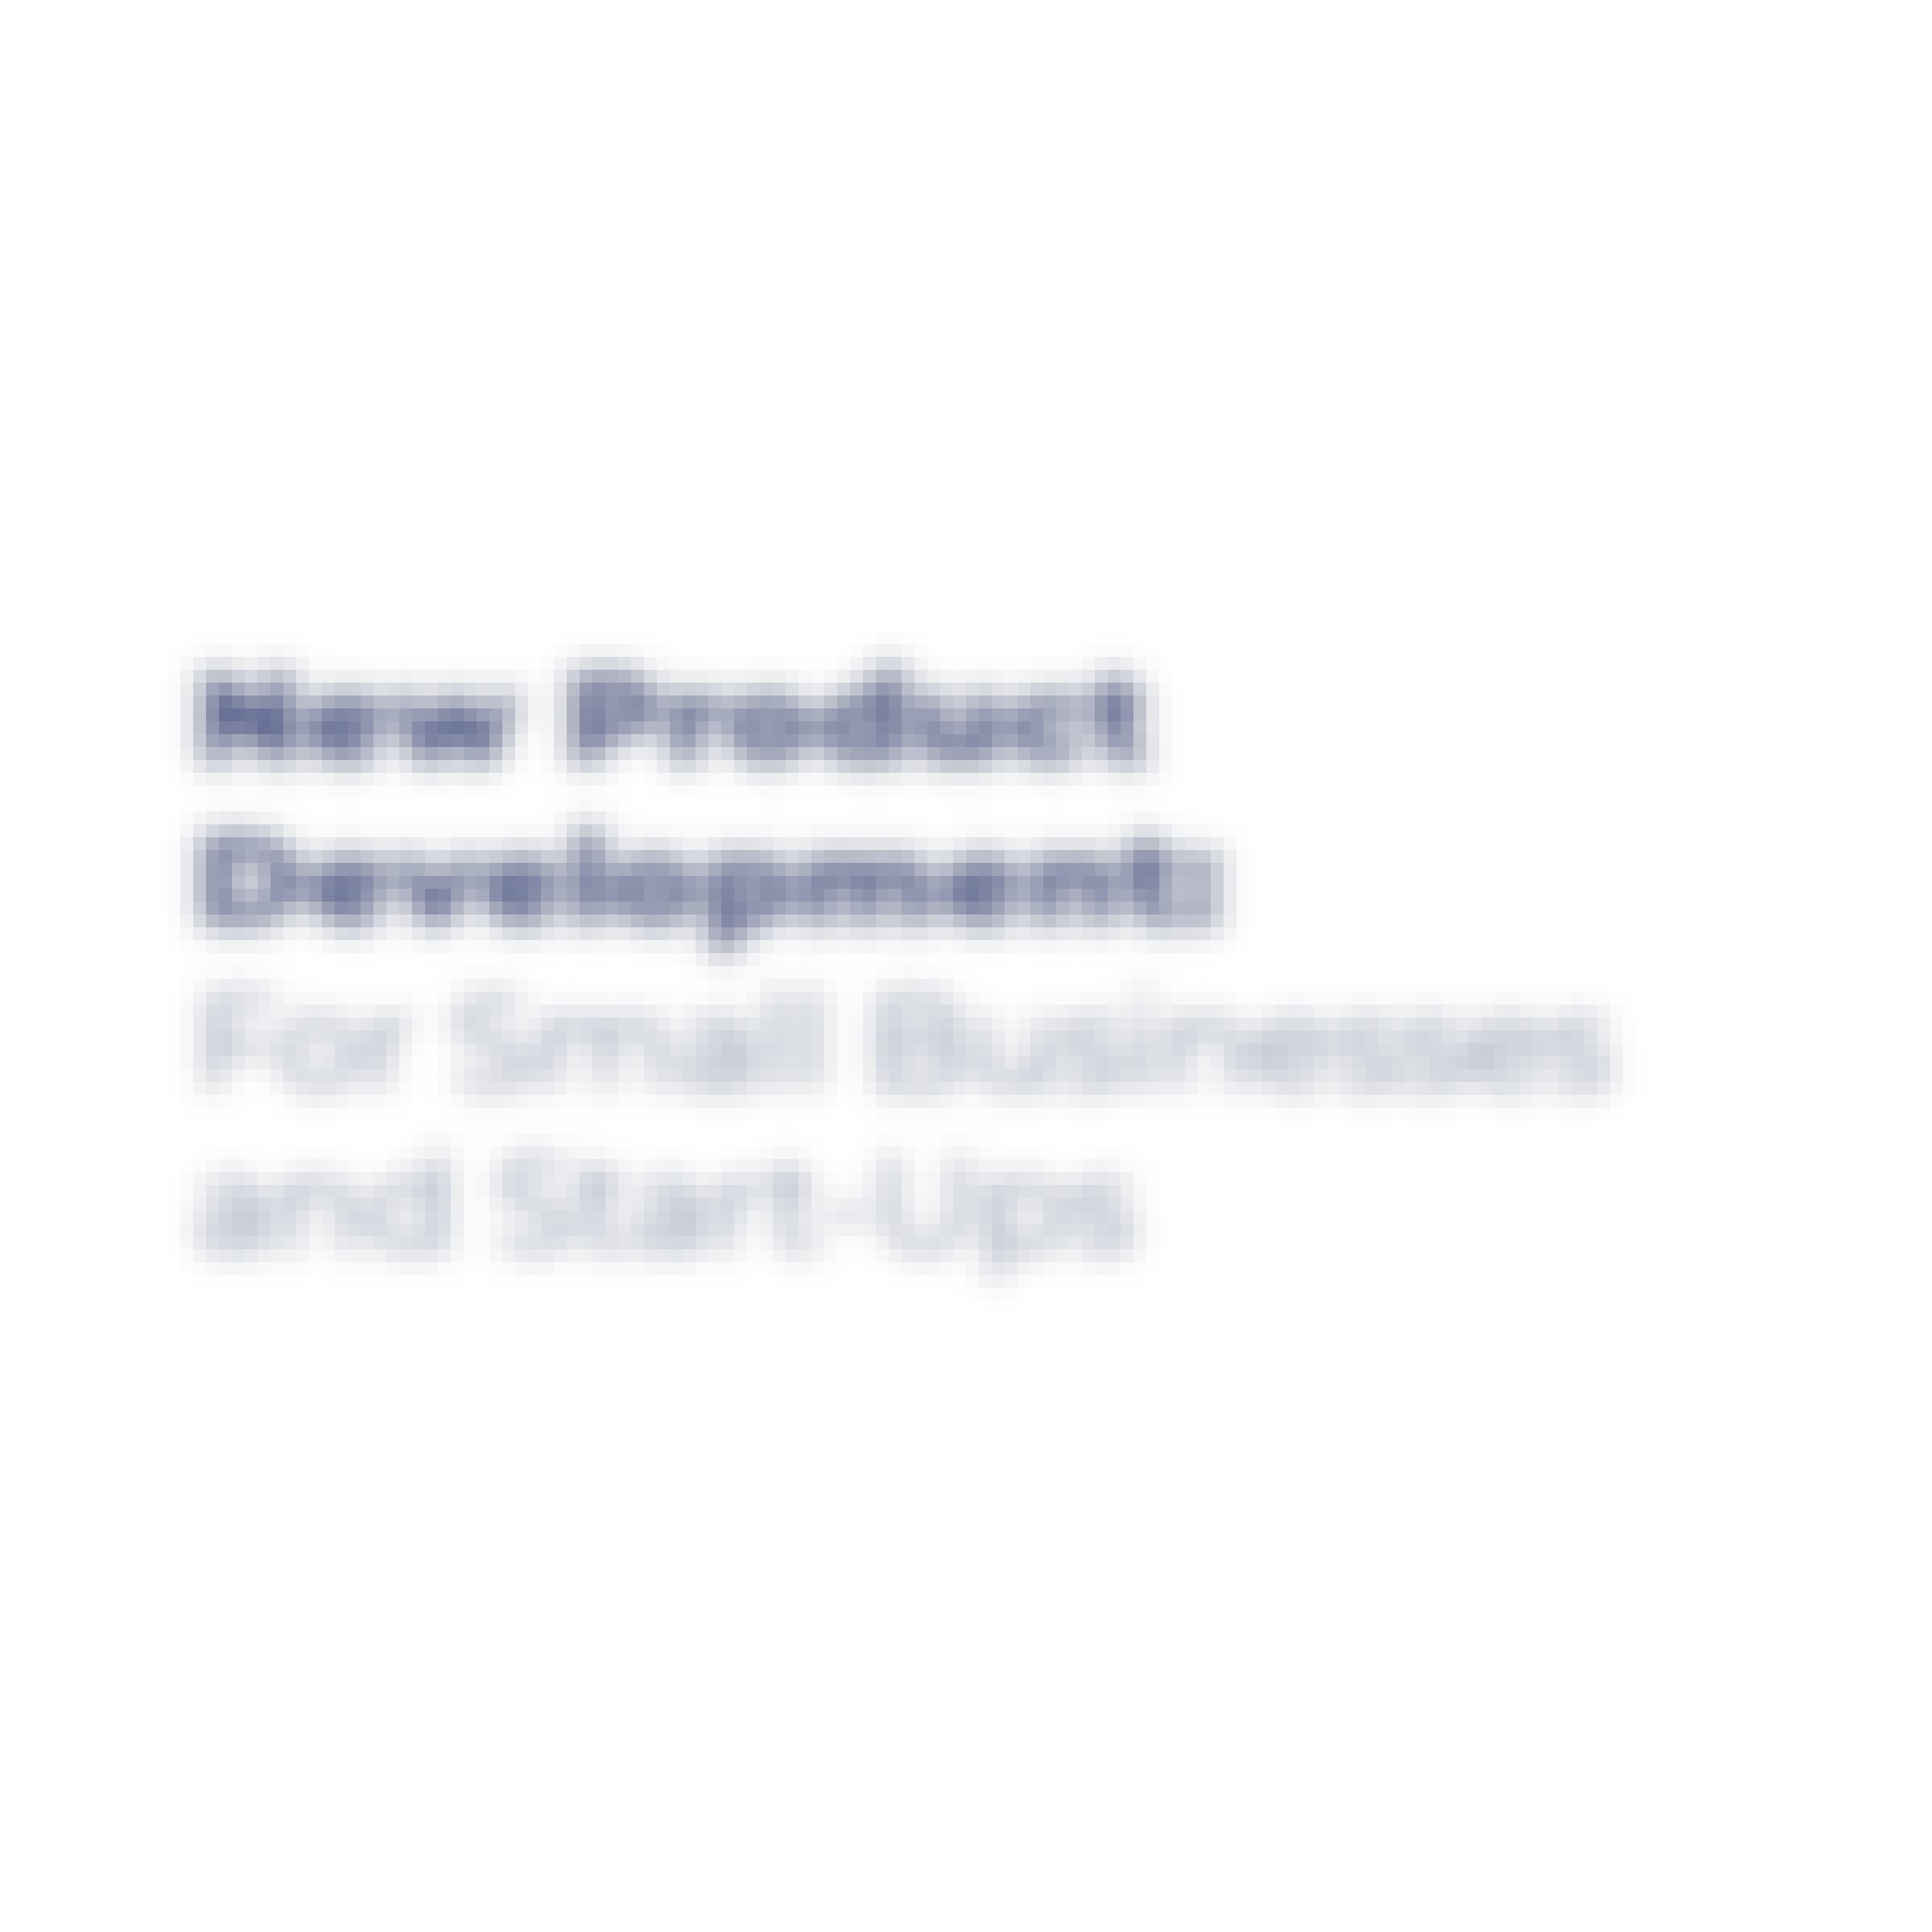 New Product Development For Small Businesses and Start-Ups